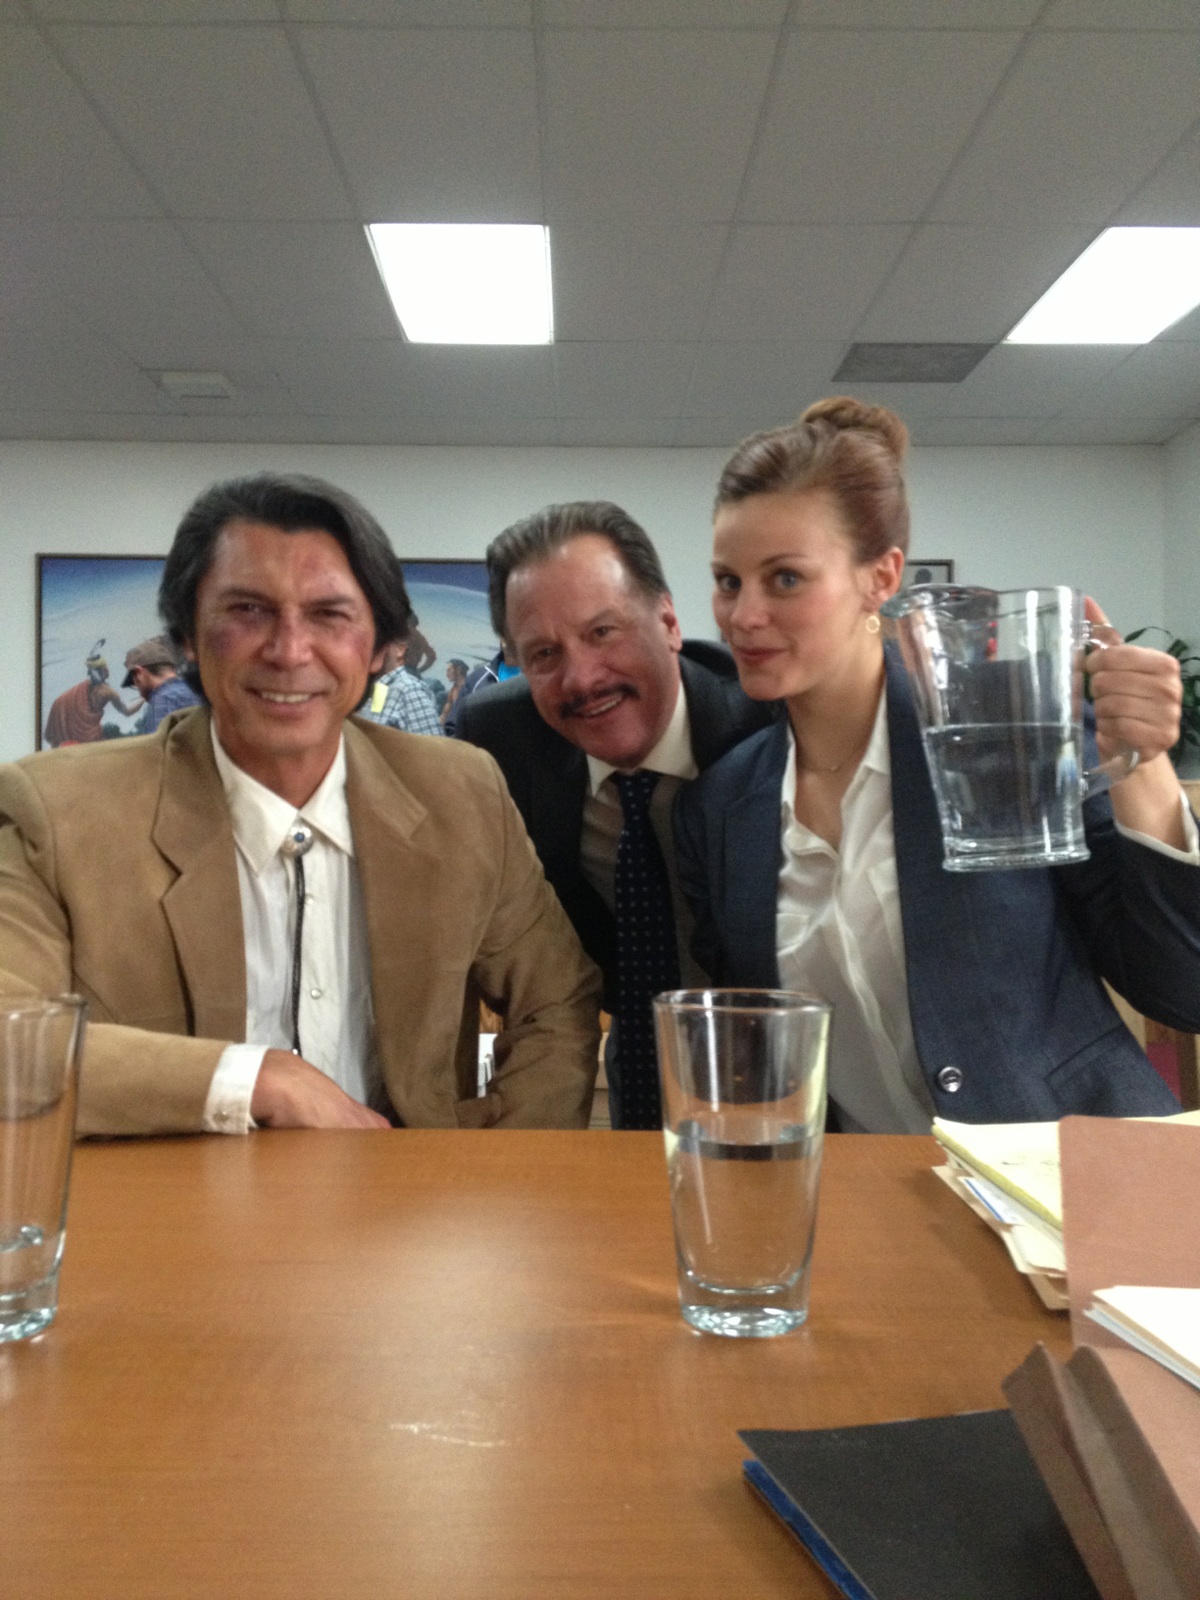 Lou being prosecuted by JD and defended by Cassidy but first a glass of water.